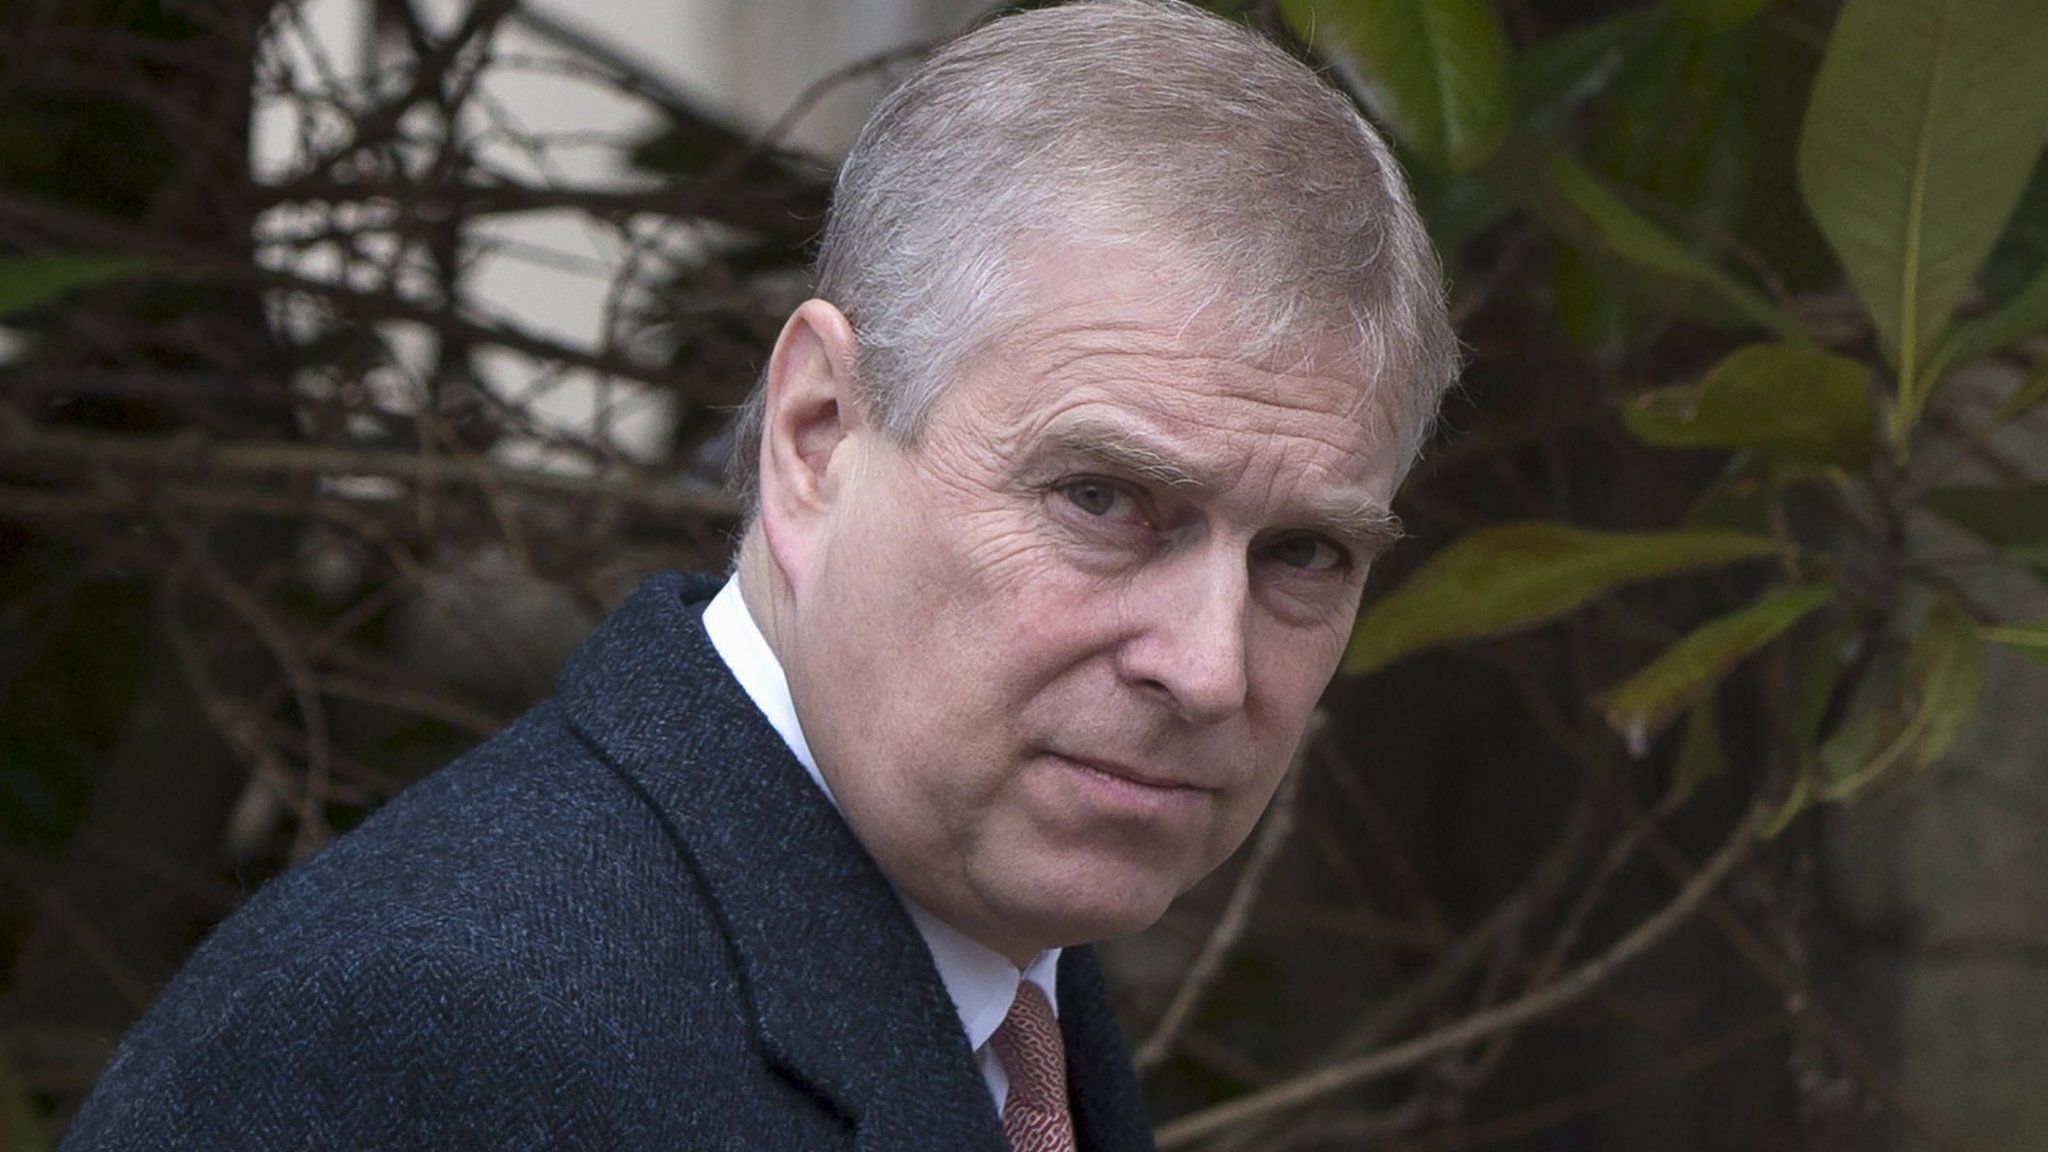 A file photo of Prince Andrew from April 2015